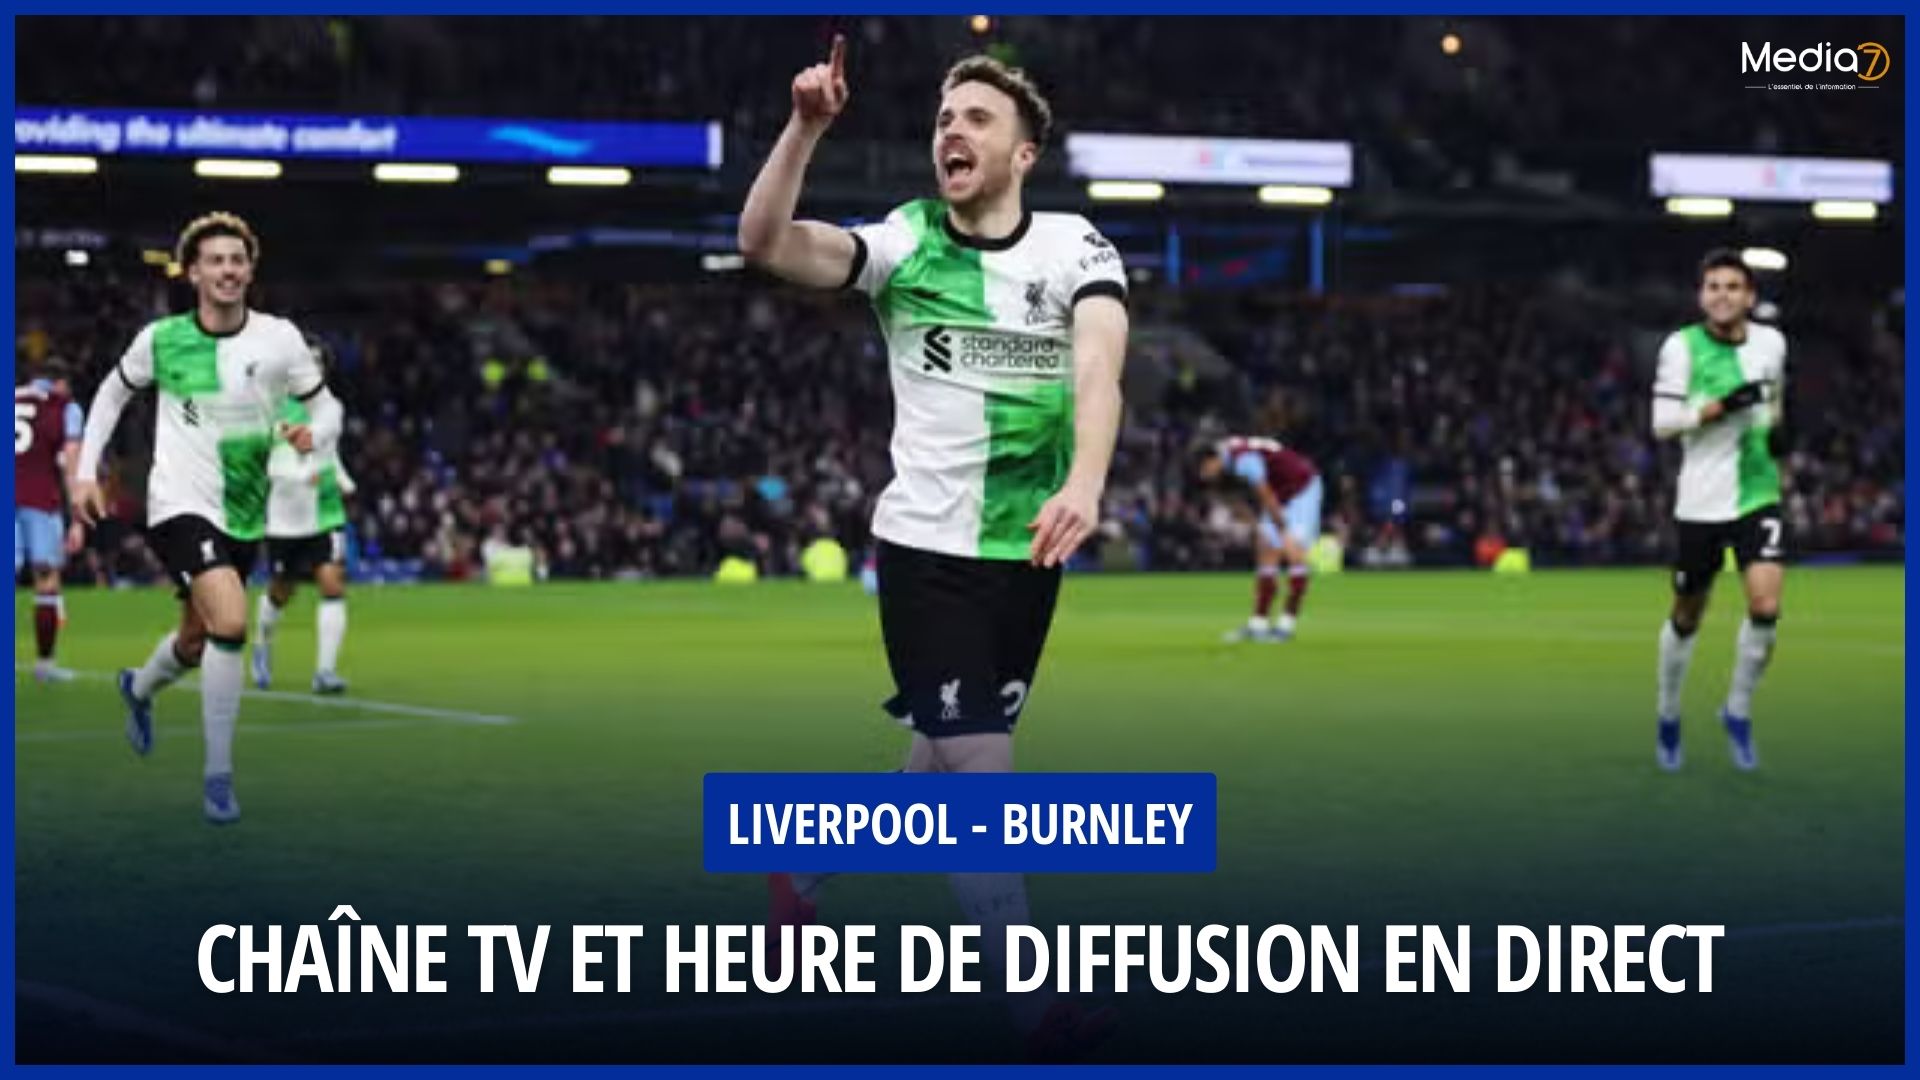 Follow the Liverpool - Burnley Match Live: Schedules and Broadcast TV & Streaming - Media7